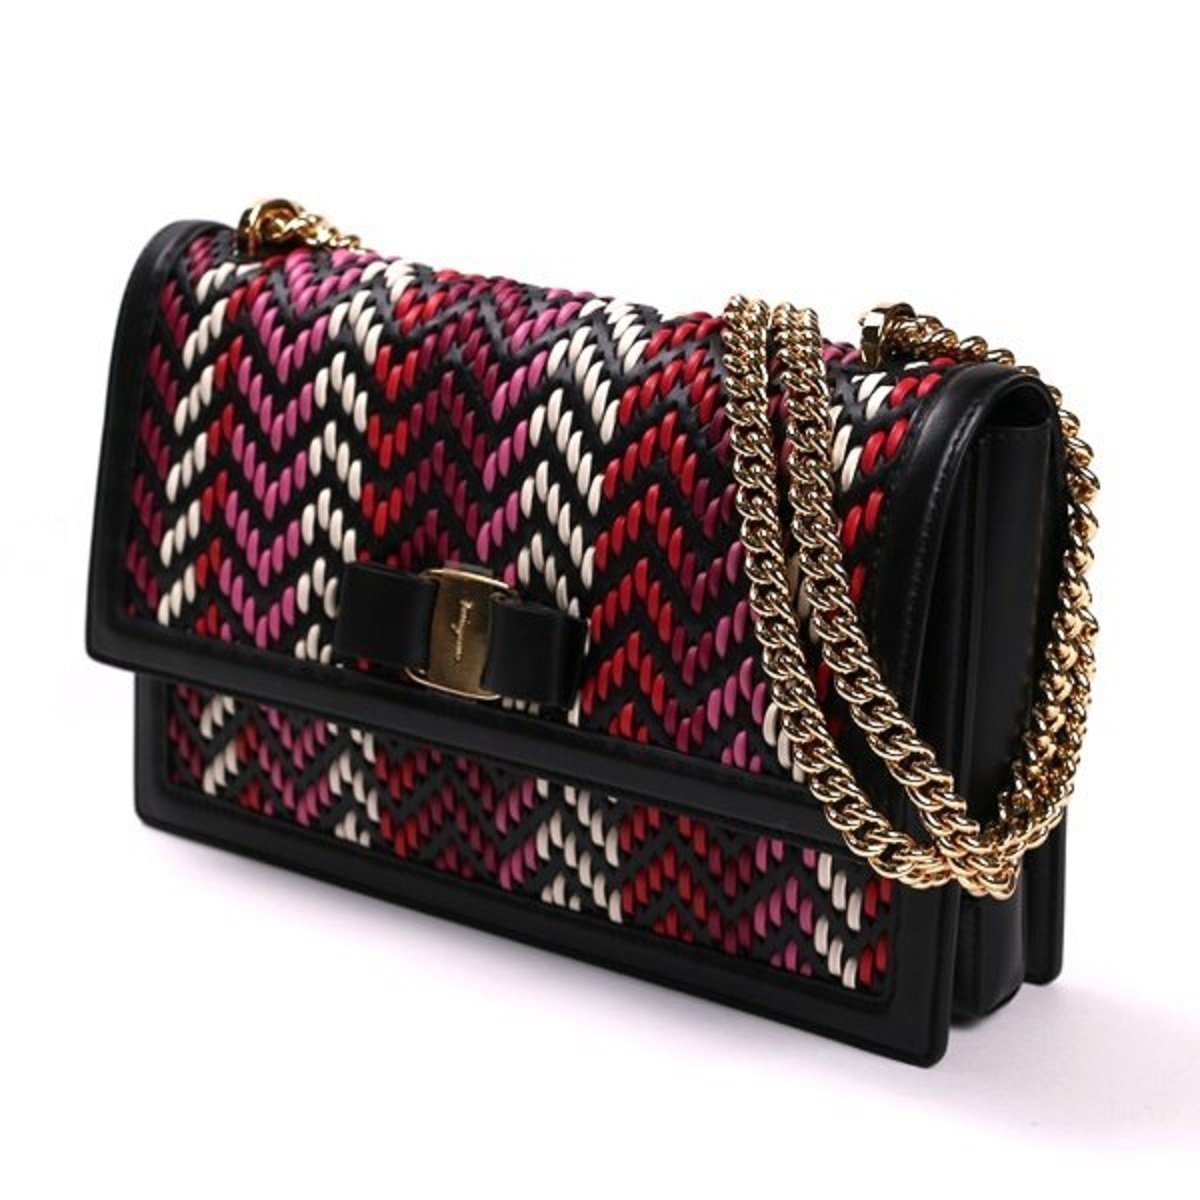 Ferragamo Ginny Multi Pink and Red Plaited Calf Leather Shoulder Bag